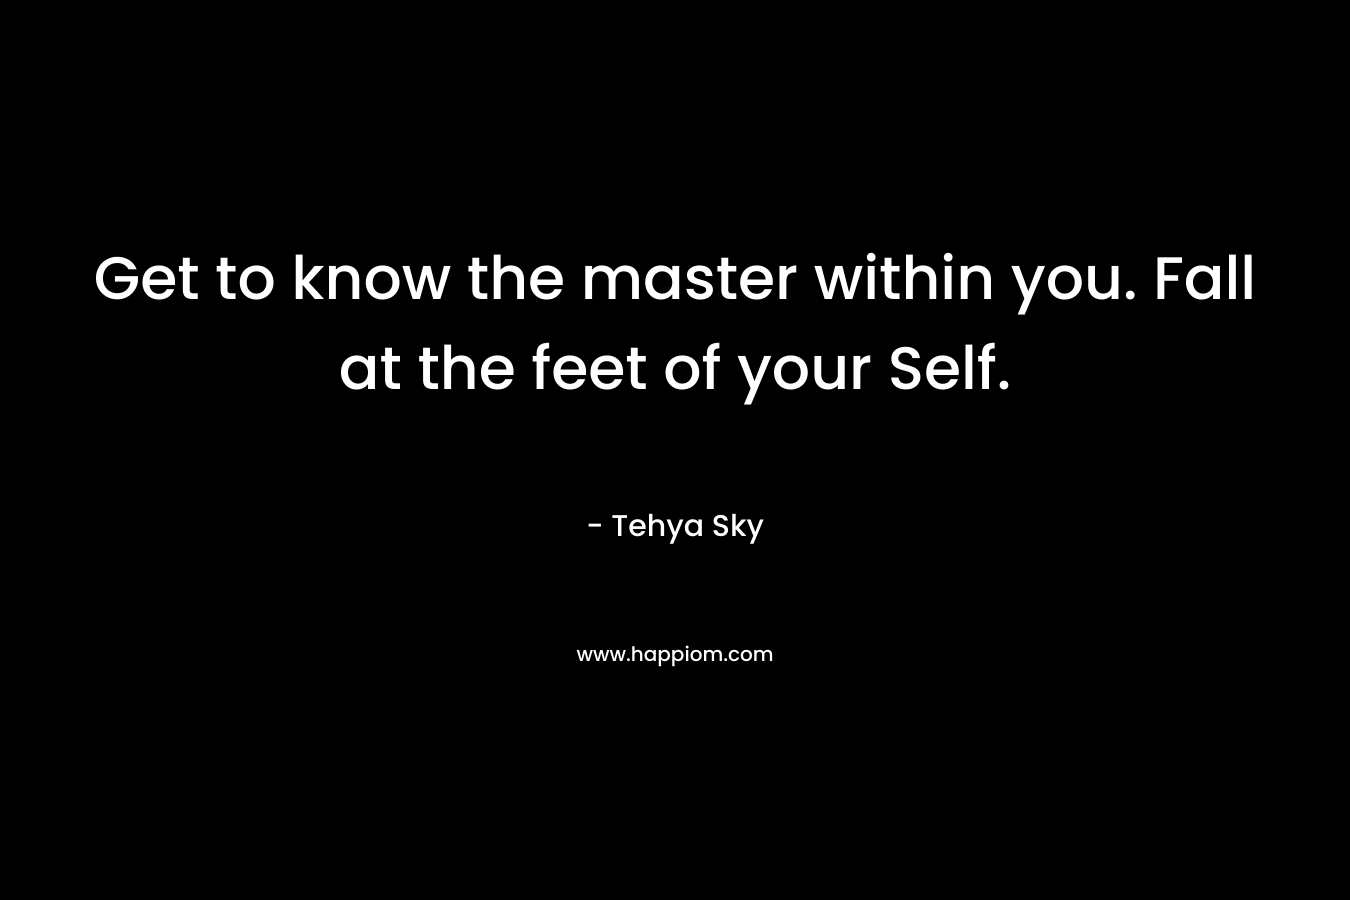 Get to know the master within you. Fall at the feet of your Self. – Tehya Sky